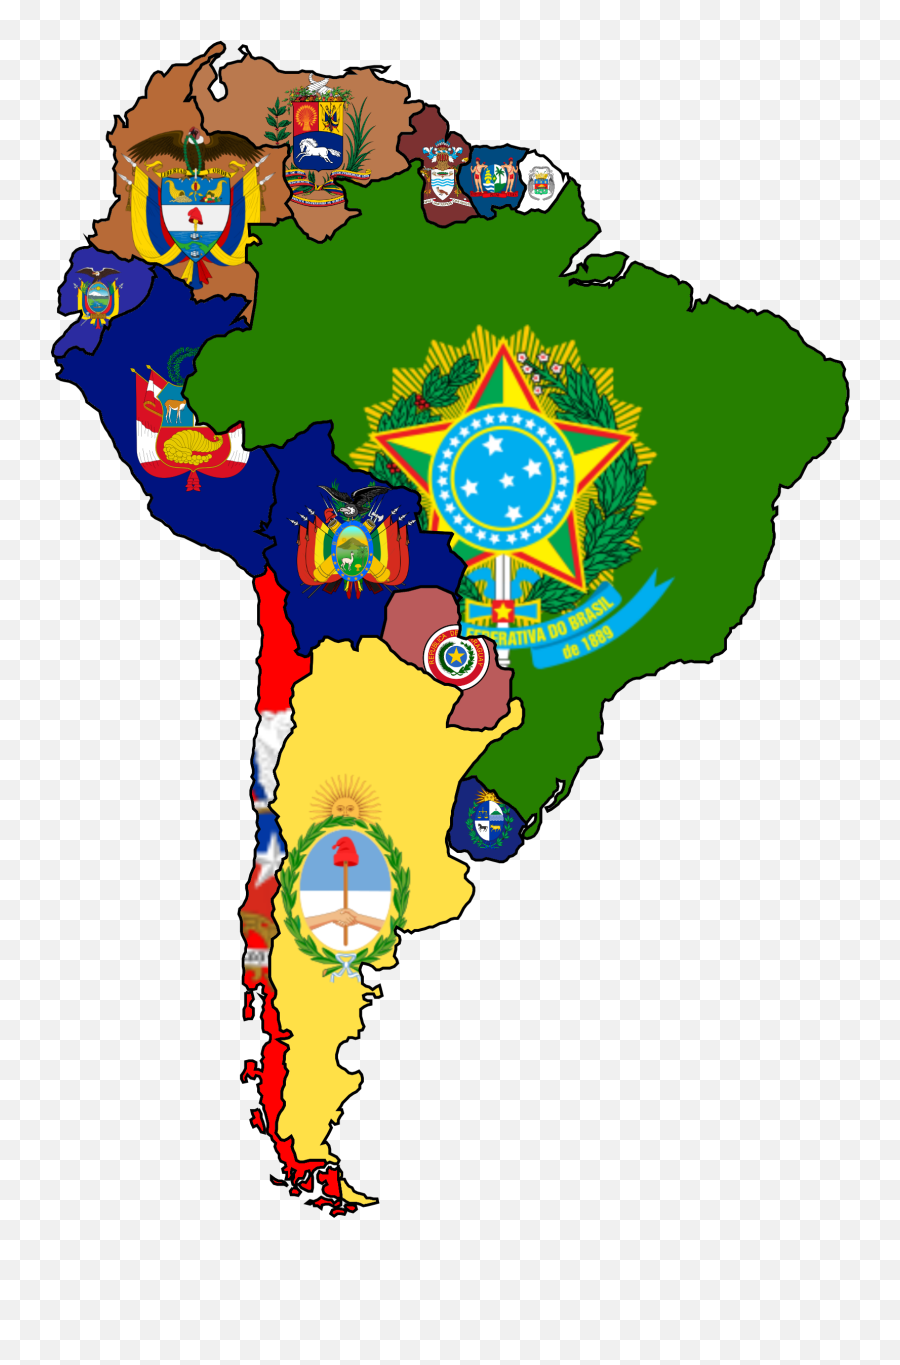 South American Country Flags In The Style Of American State - Us State Map Flag Emoji,Country Flags Emotion Android